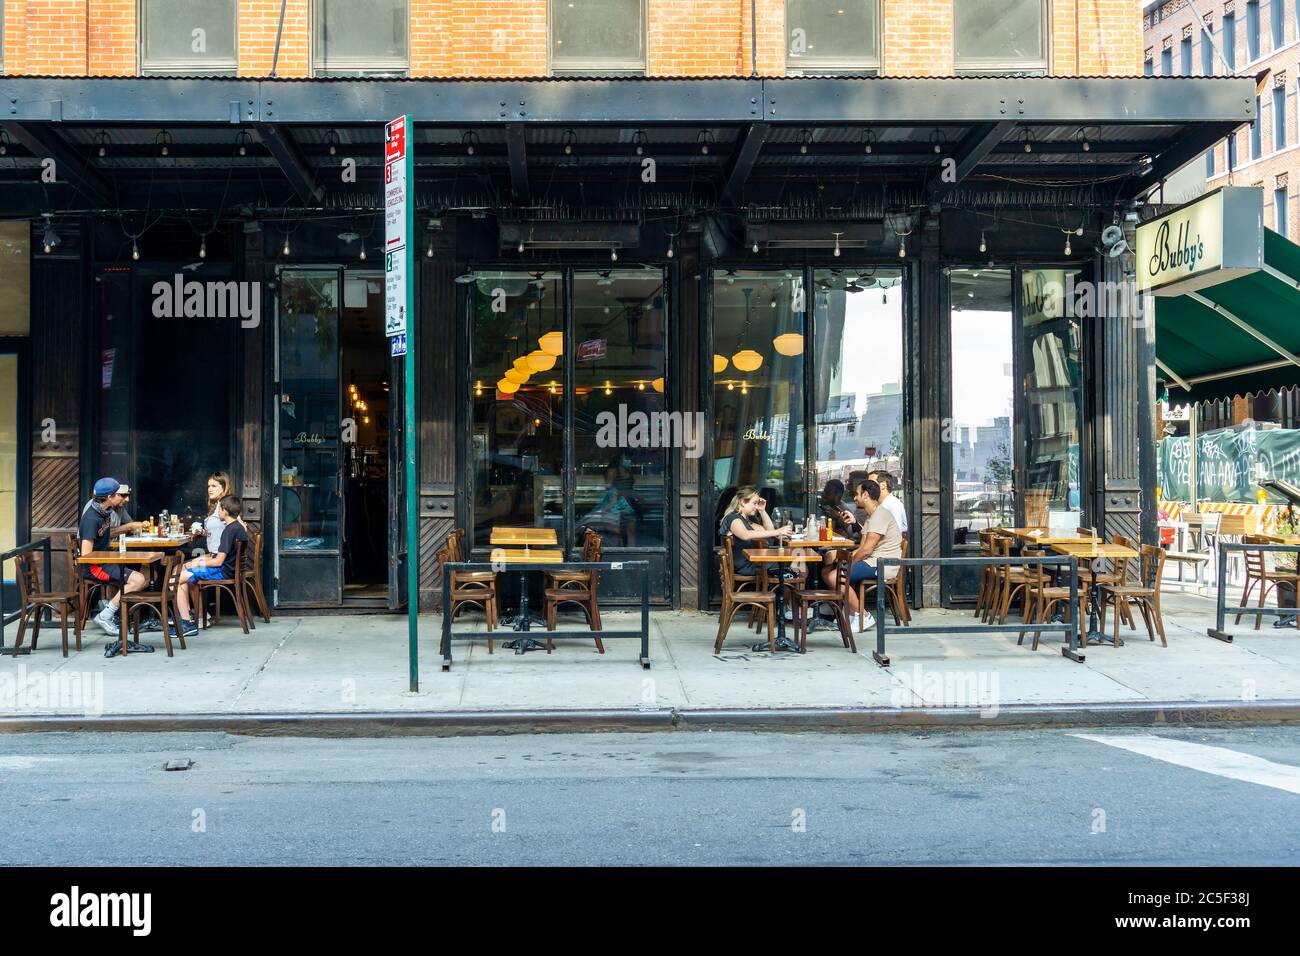 Bubby’s restaurant in the Meatpacking District in New York commences outdoor dining on Tuesday, June 23, 2020 as Phase Two of the city’s reopening plan takes effect. Al fresco dining is now allowed with restrictions as well as in store shopping. (© Richard B. Levine) Stock Photo